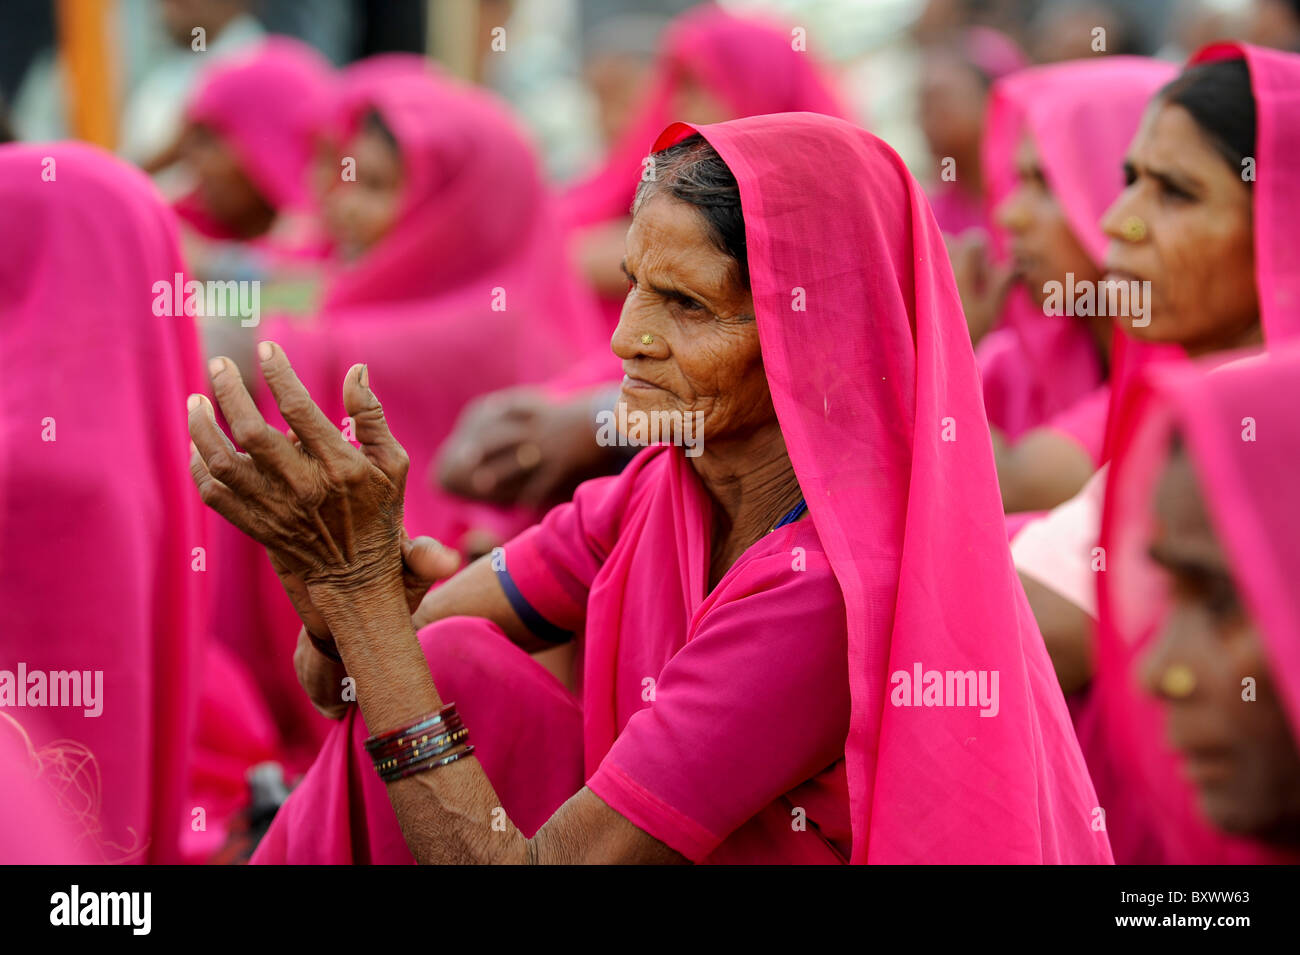 India UP city Banda , rally of women movement Gulabi gang with her leader Sampat Pal Devi, the women in pink sari fight against violence against women Stock Photo